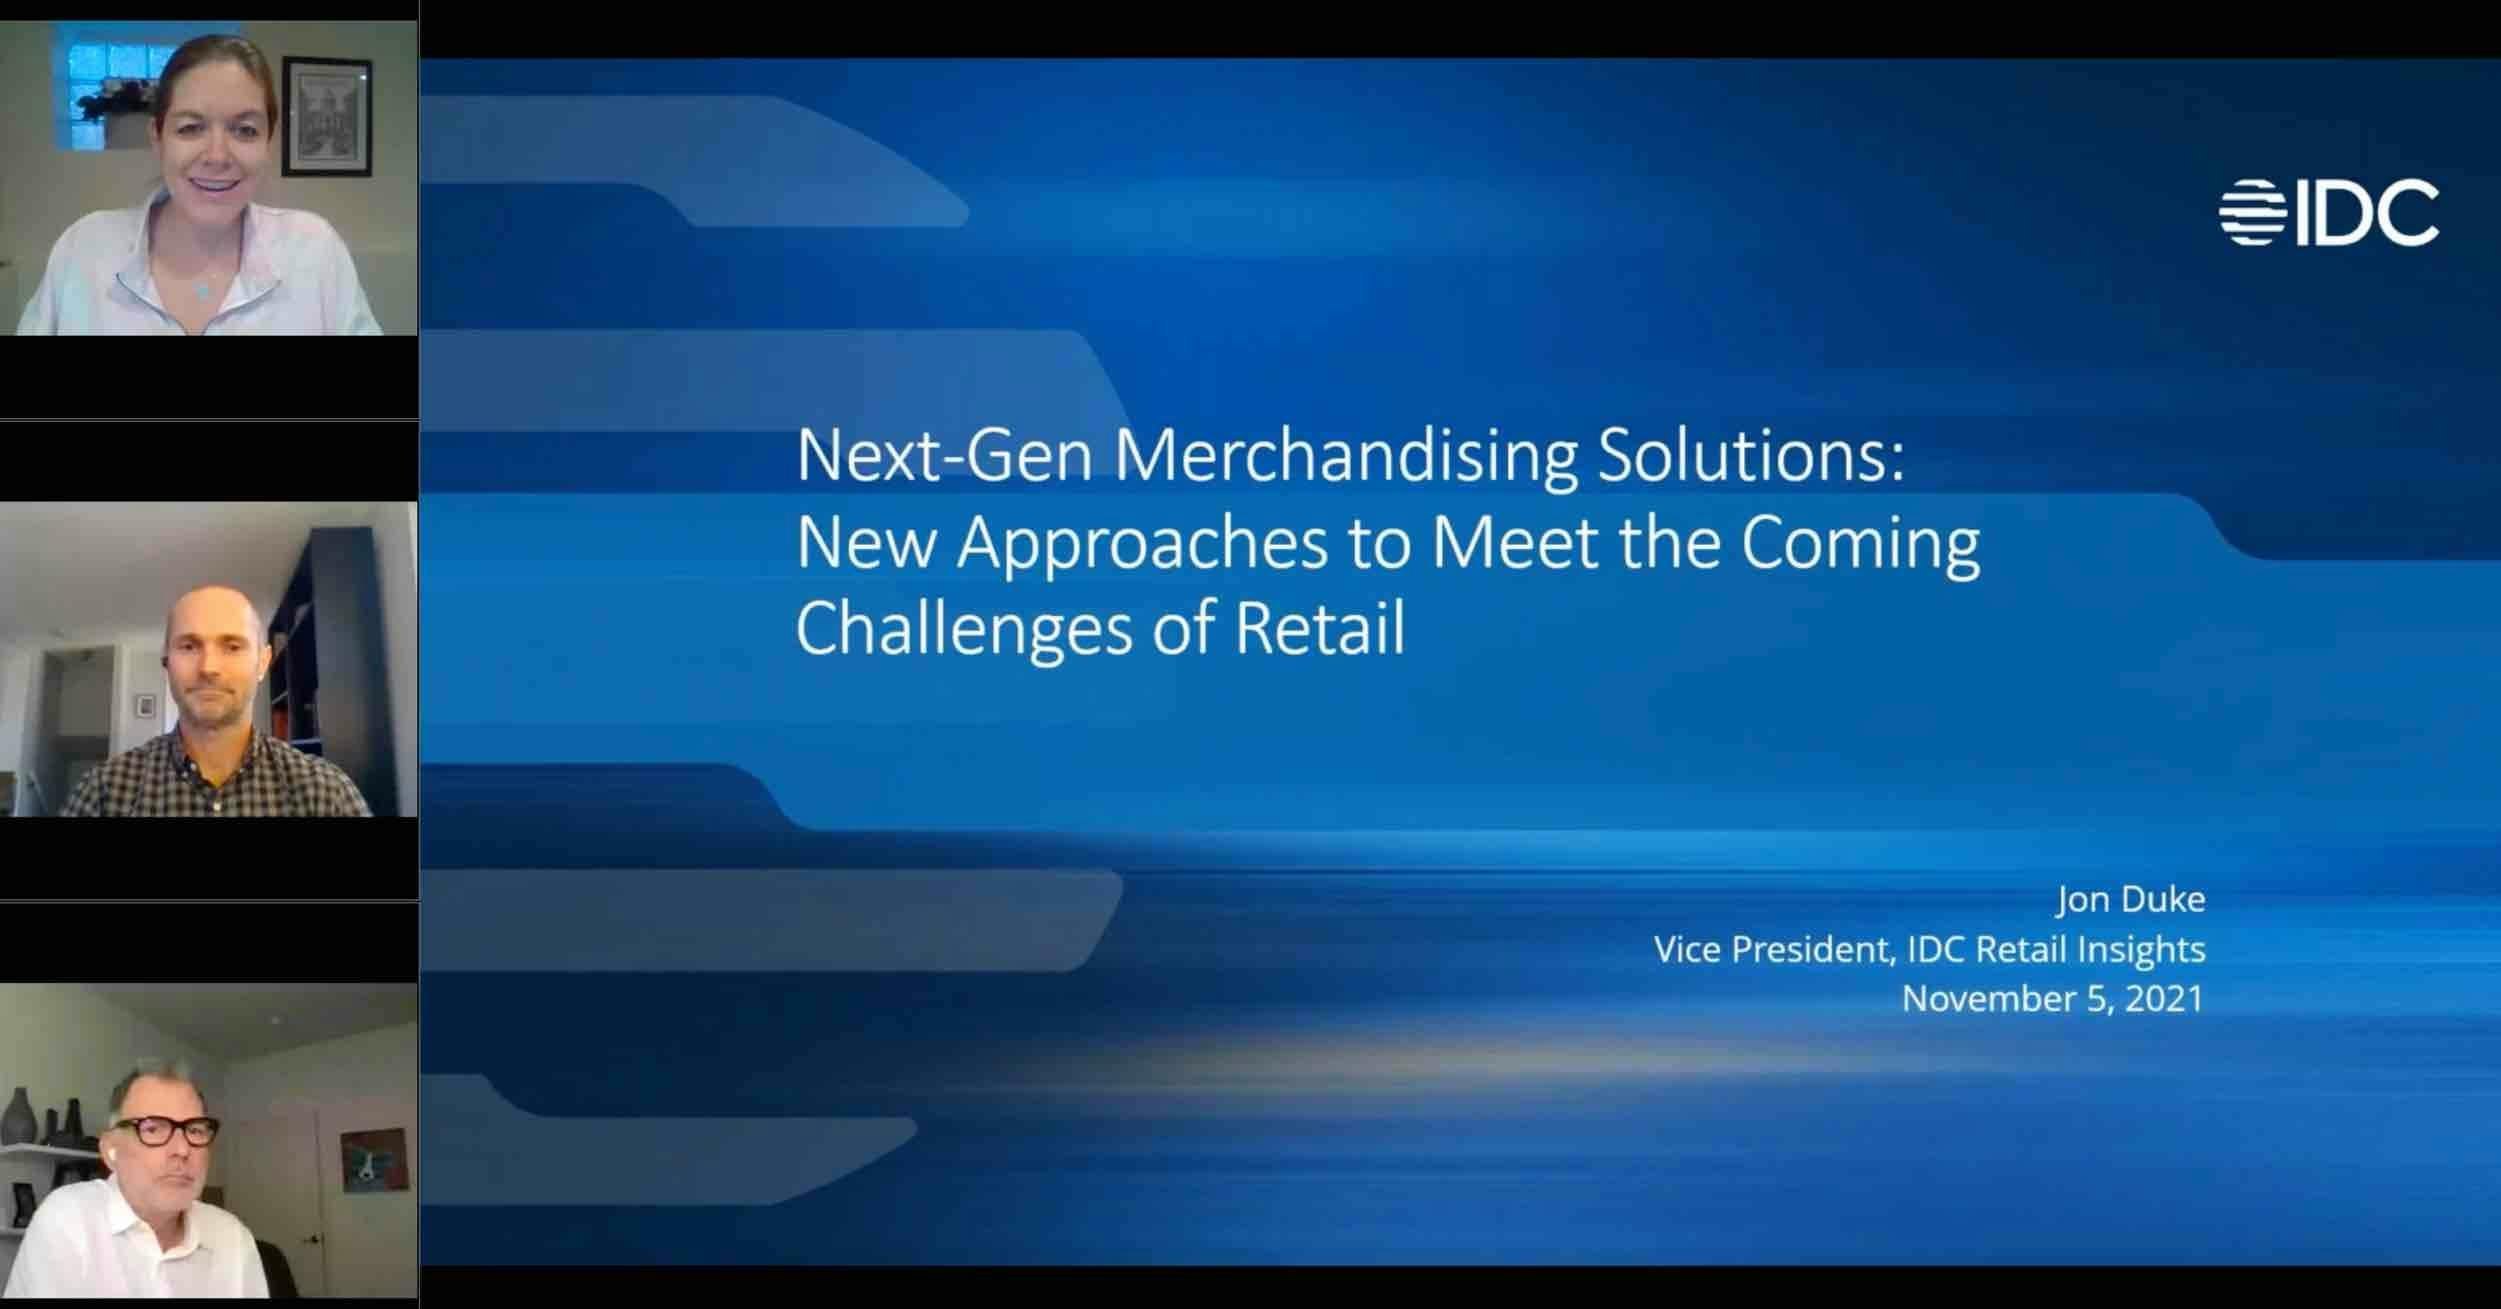 Webinar: IDC Research's Next-Gen Merchandising Solutions Are Coming: New Approaches to Meet the Coming Challenges of Retail